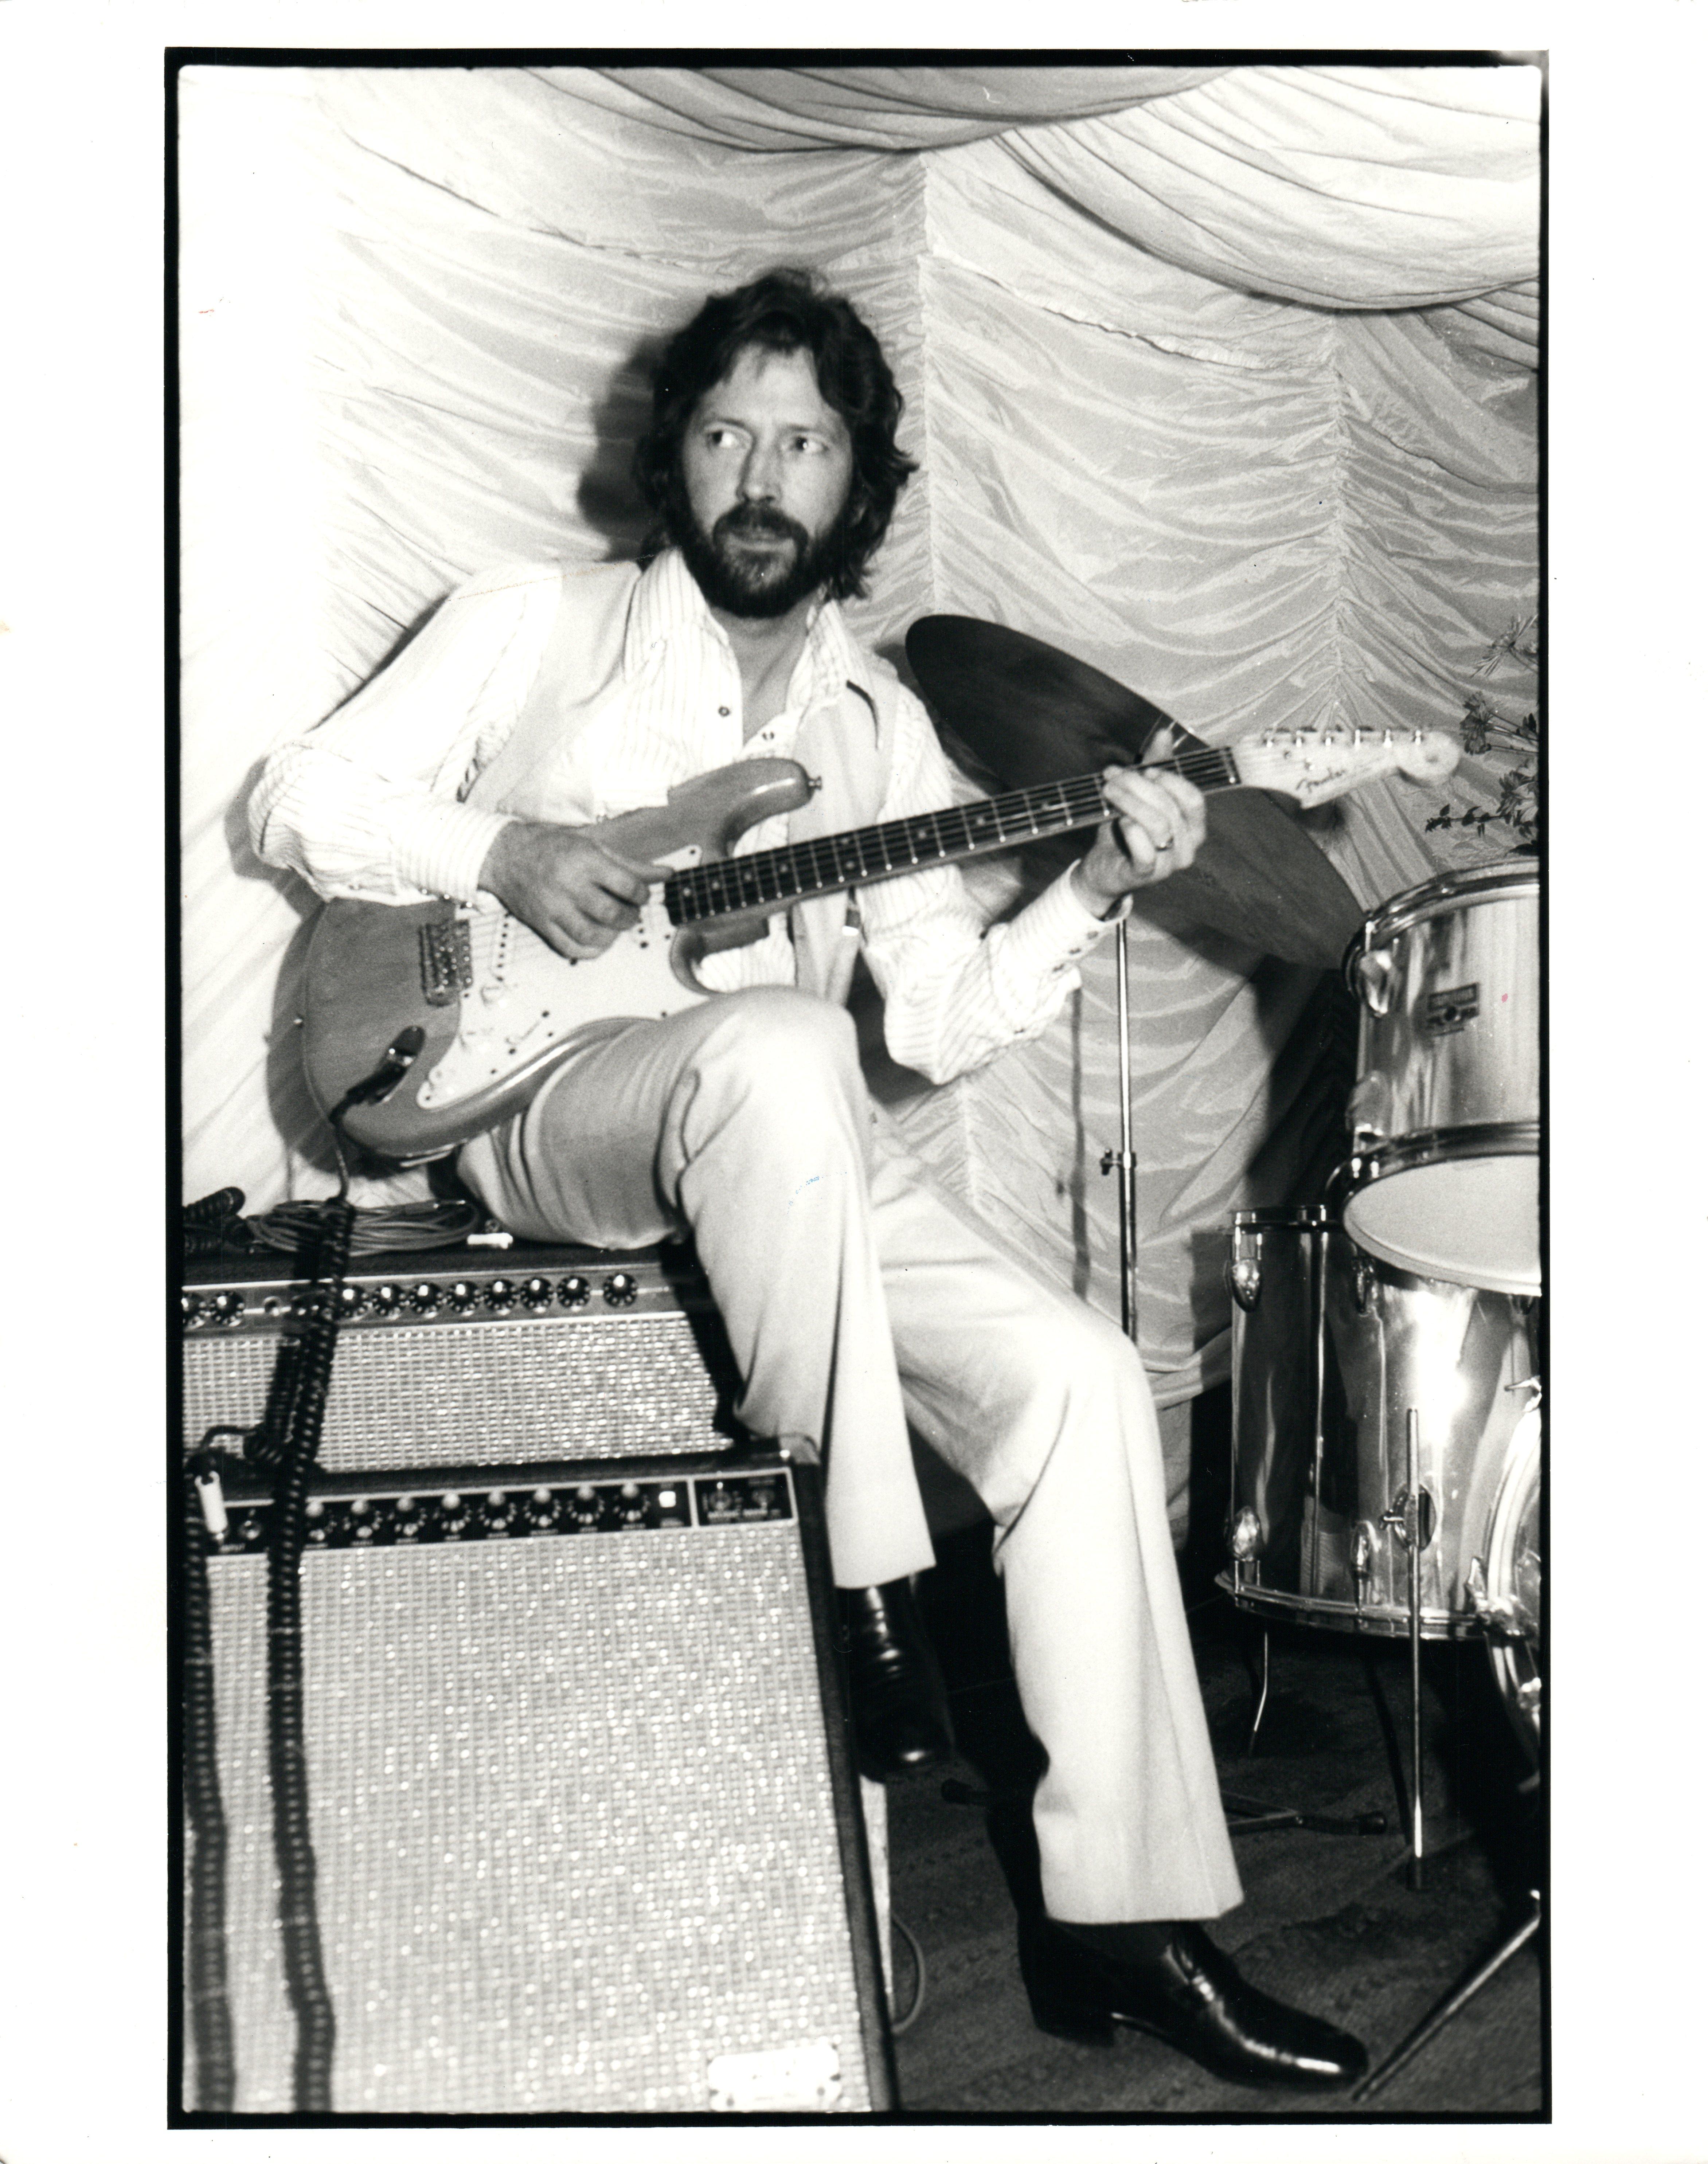 Paul Canty Black and White Photograph - Eric Clapton Sitting on Amp, Playing Guitar Vintage Original Photograph